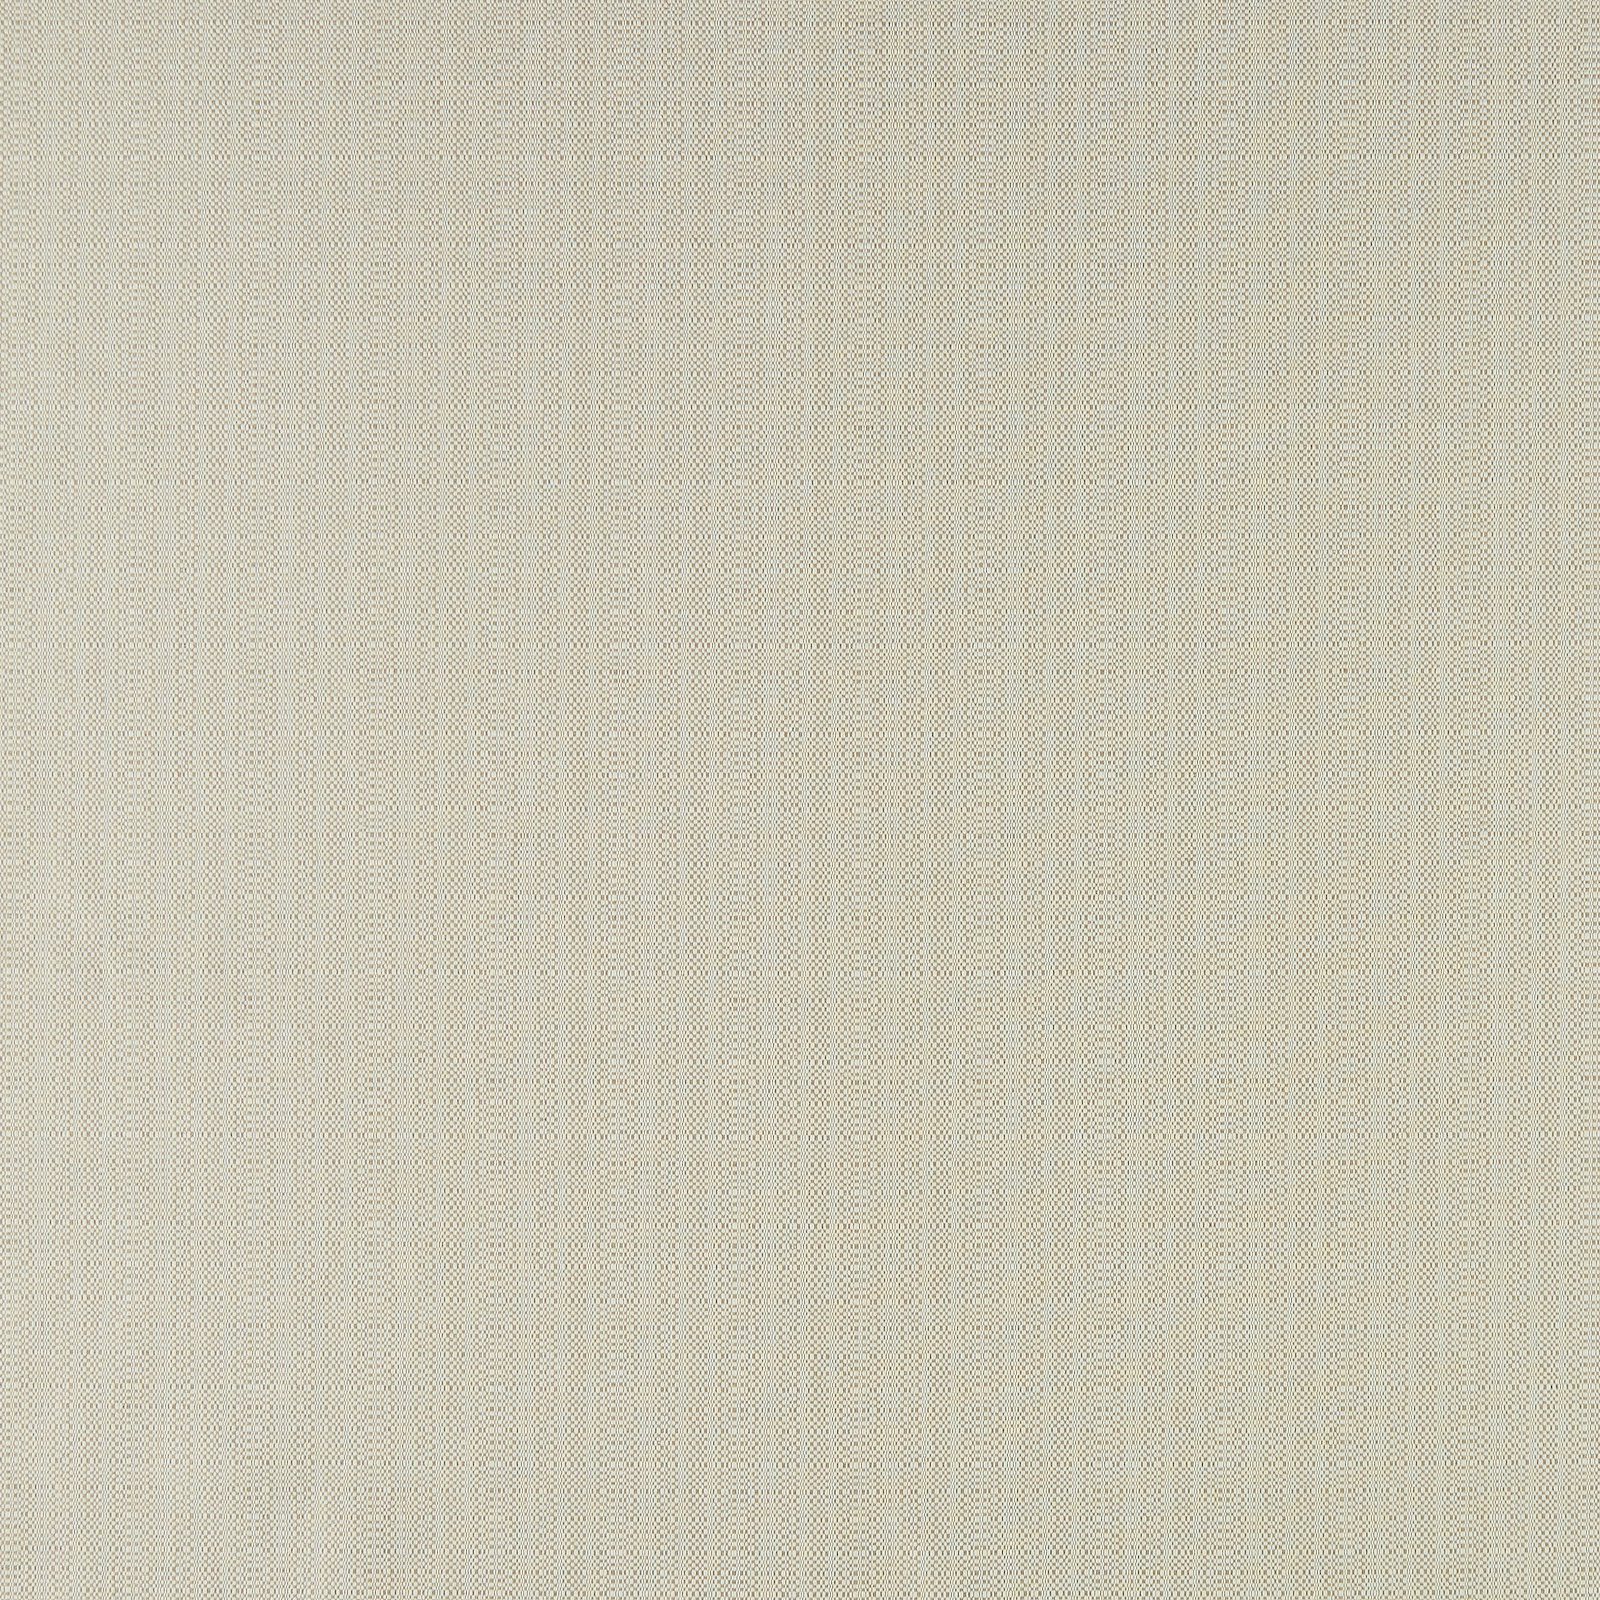 Recycled jacquard offwhite/sand pattern 780943_pack_sp